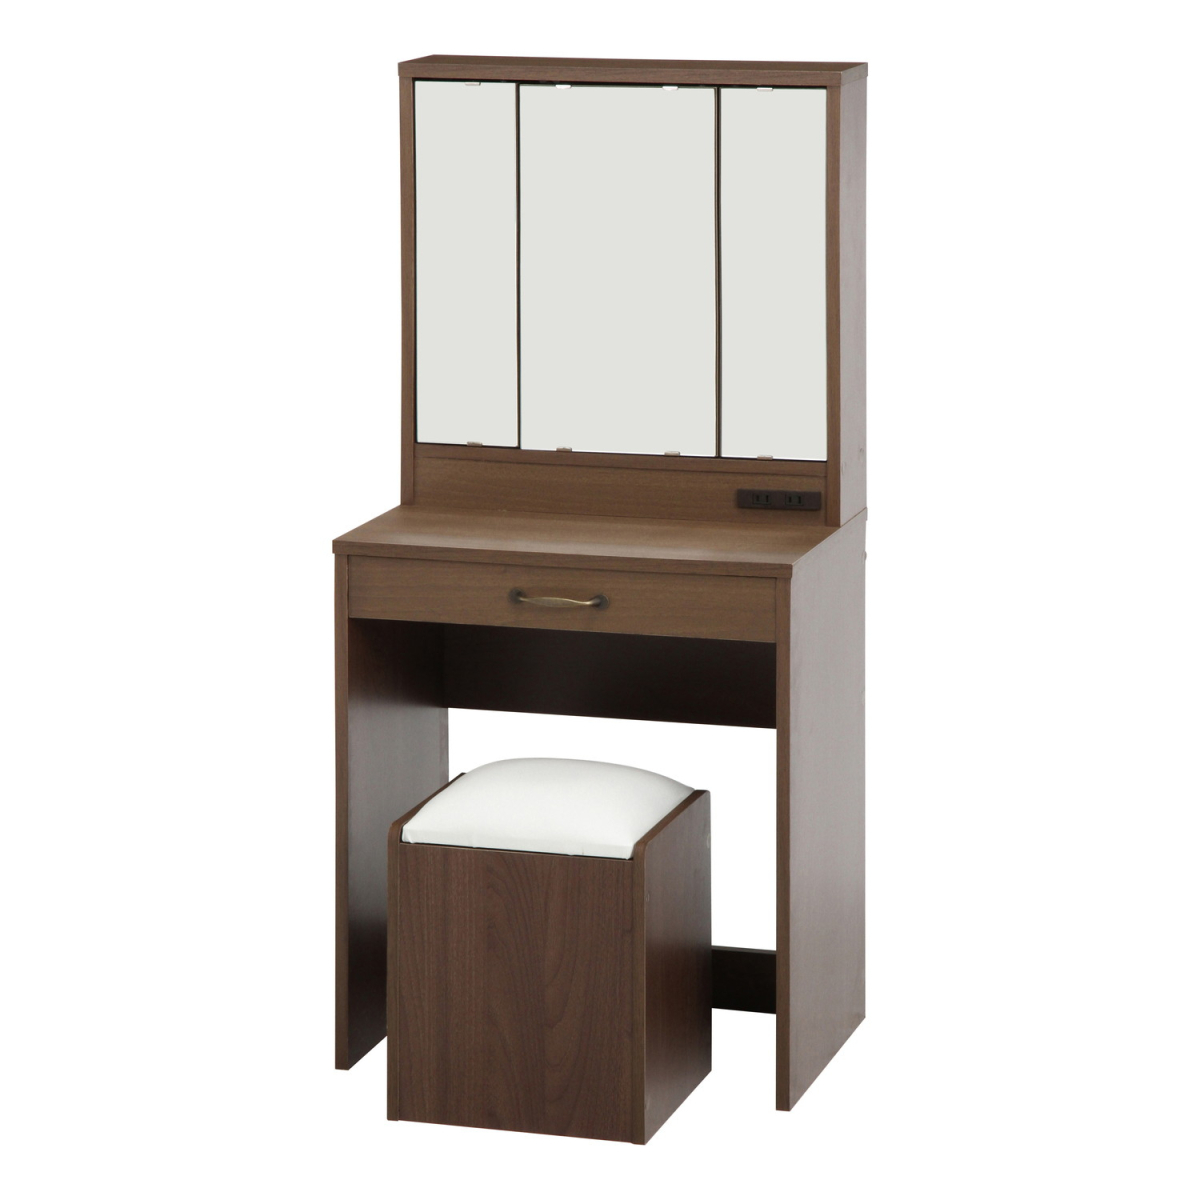  dresser three surface mirror chair attaching outlet attaching medium Brown [ new goods ][ free shipping ]( Hokkaido Okinawa remote island postage separately )